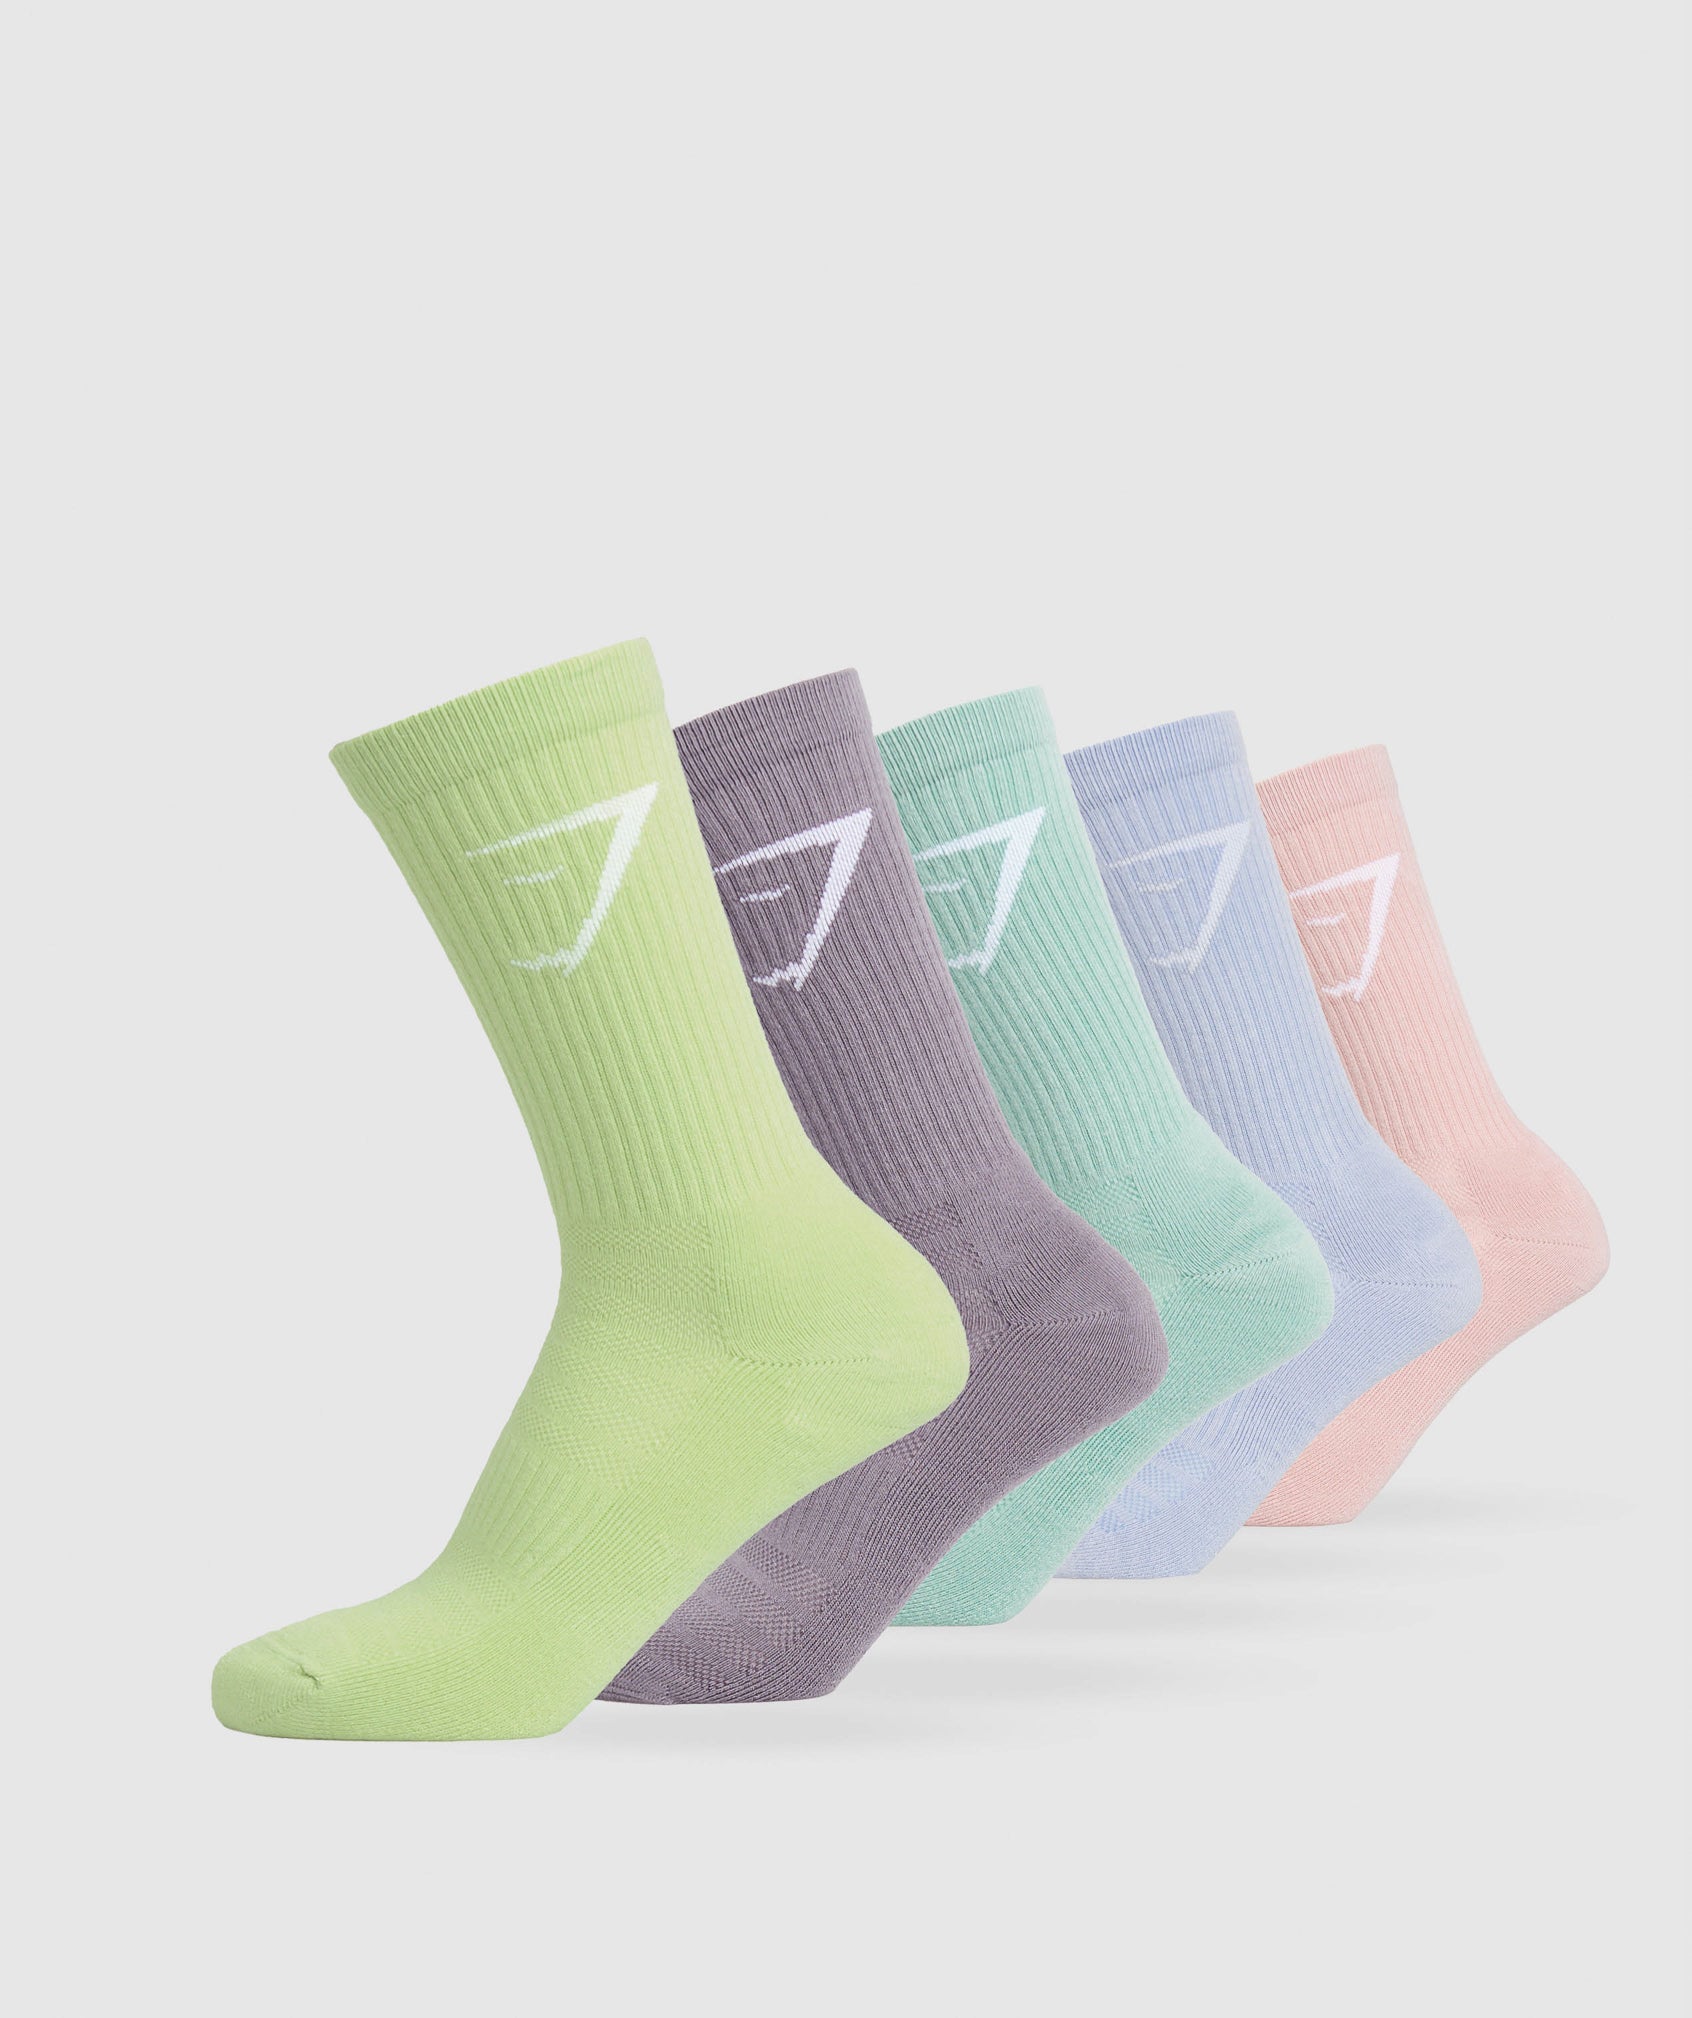 Crew Socks 5pk in Sage Green/Silver Lilac/Lido Green/Purple/Pink is out of stock